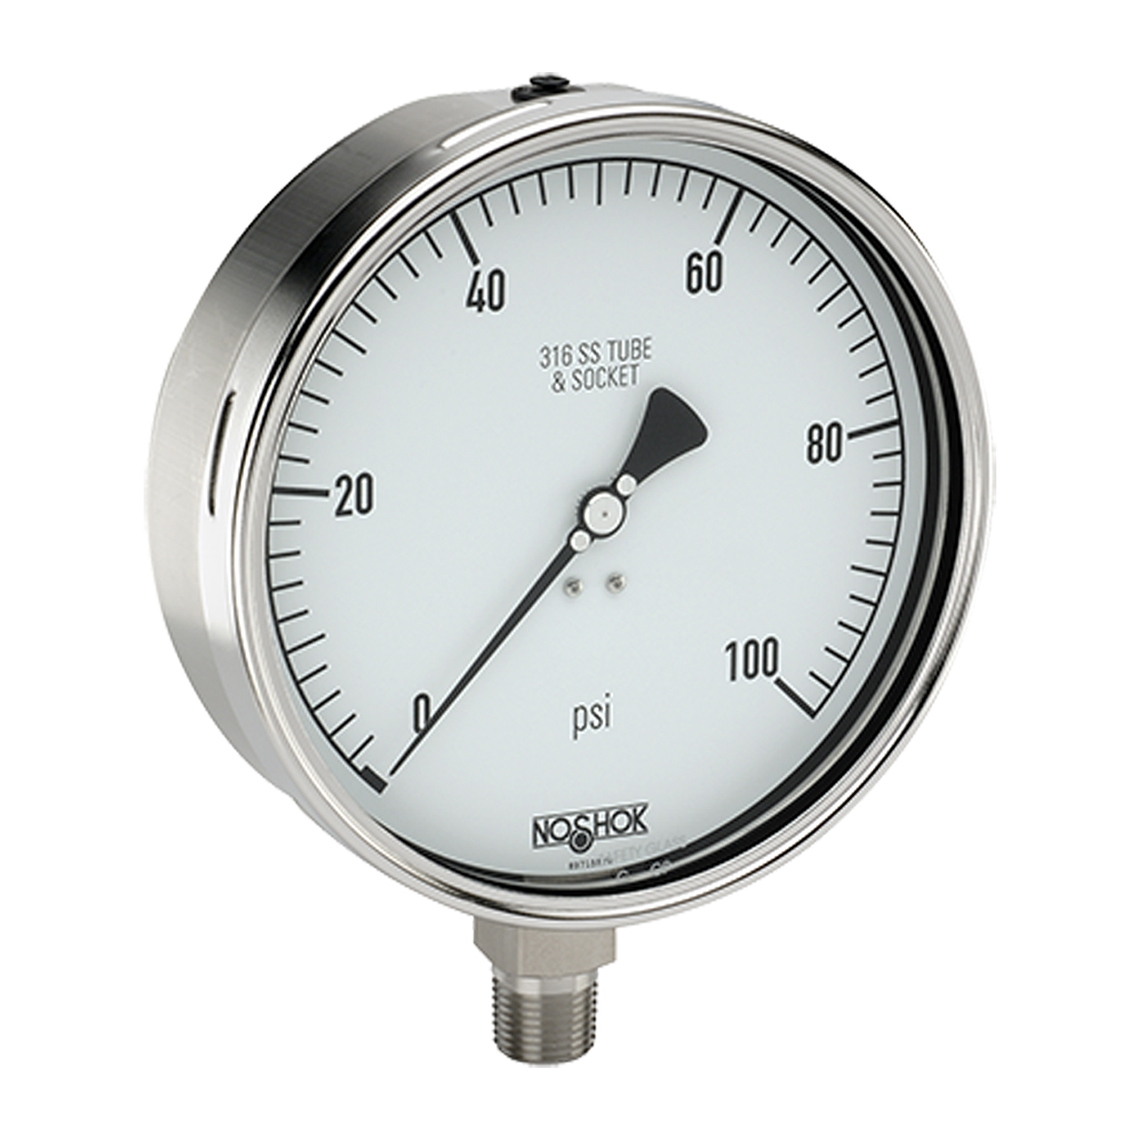 60-400-30-psi/bar 400/500 Series All Stainless Steel Dry and Liquid Filled Pressure Gauges